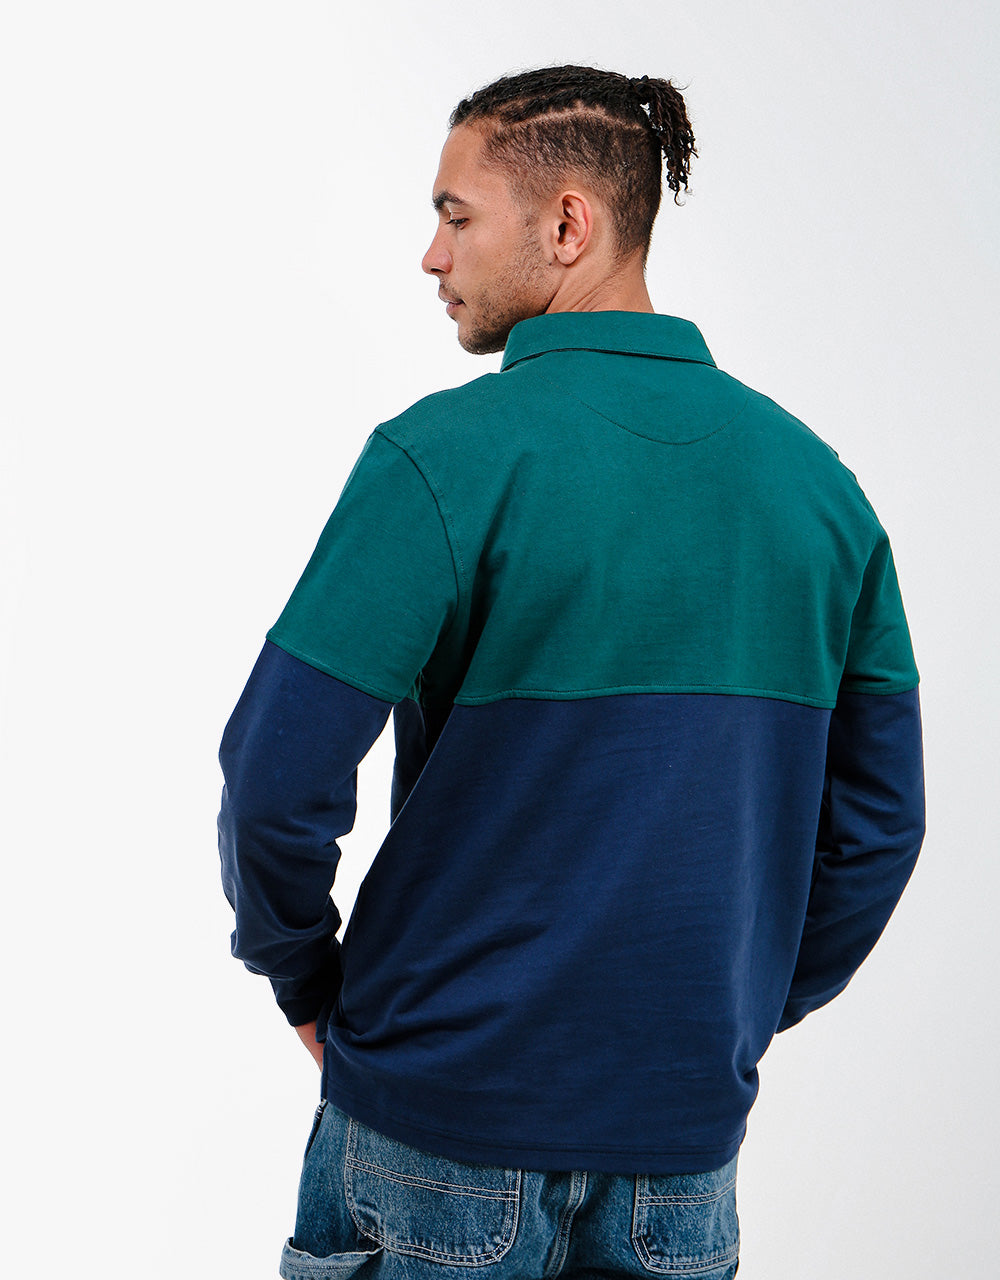 Route One Split Polo Shirt - Forest Green/Navy